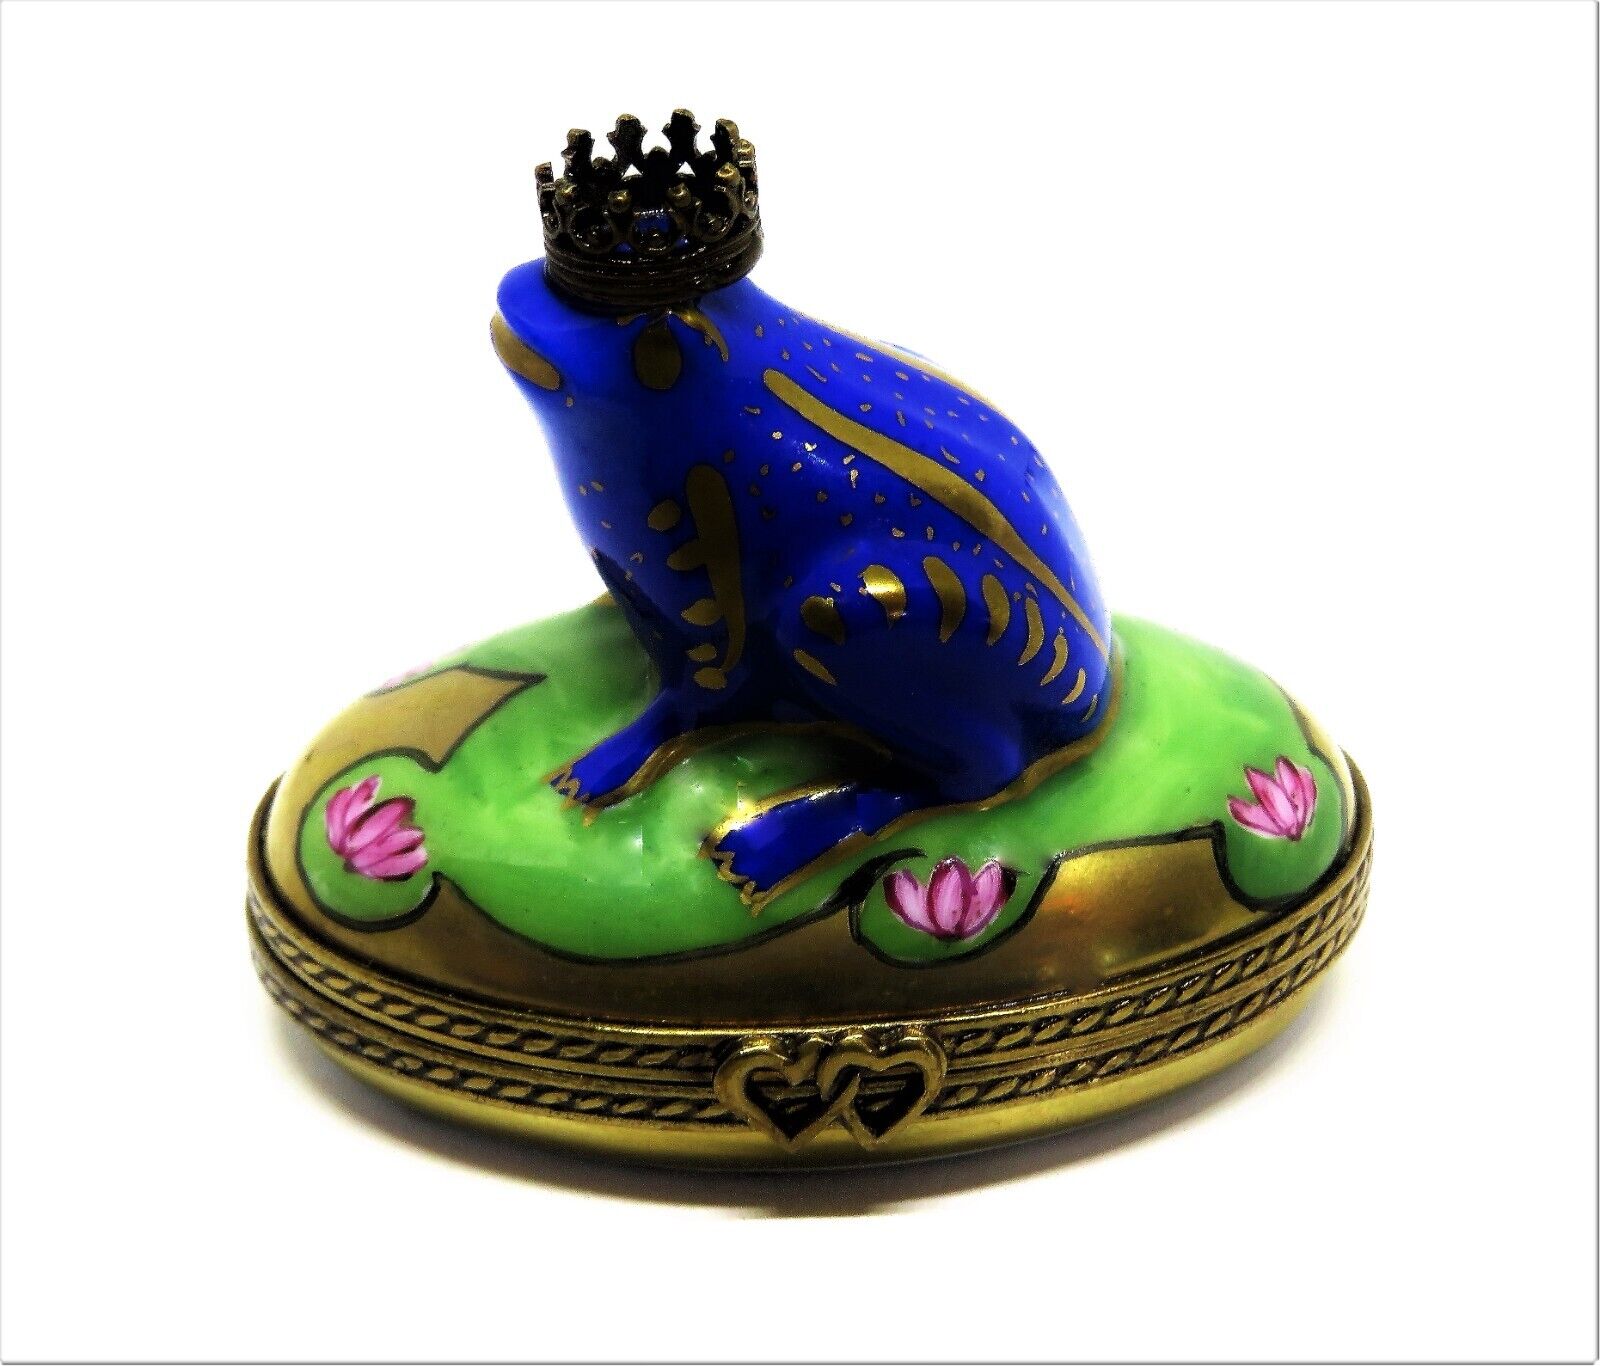 LIMOGES FRANCE BOX -WHIMSICAL BLUE FROG PRINCE & METAL CROWN- LILY PAD & FLOWERS